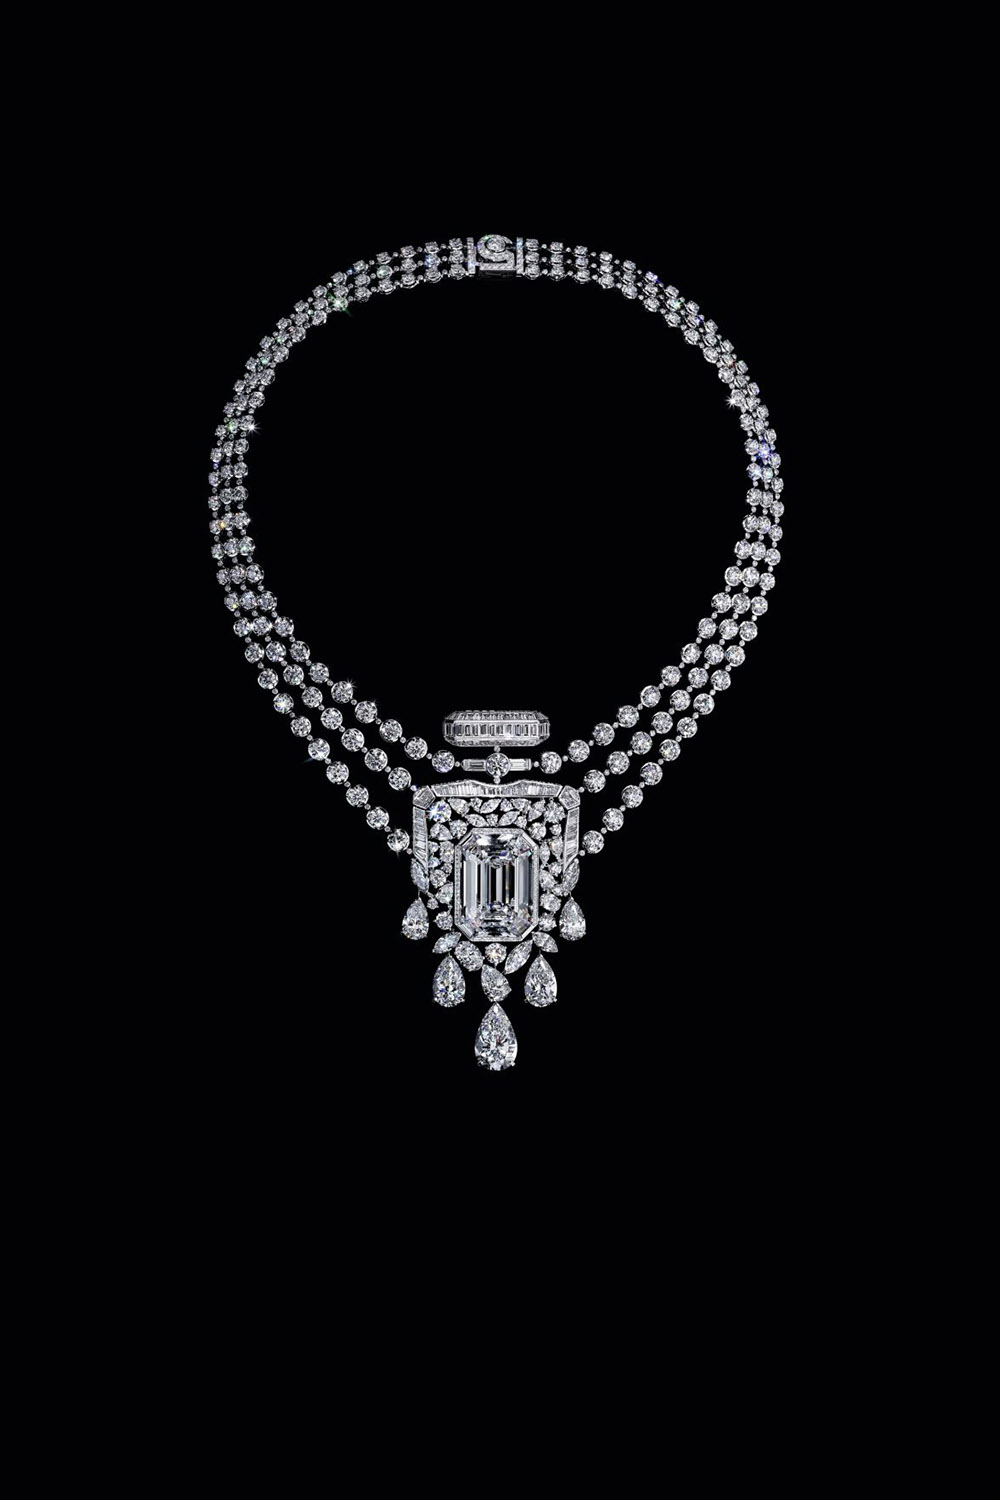 Chanel dedicates a 55.55-carat diamond necklace to the 100th